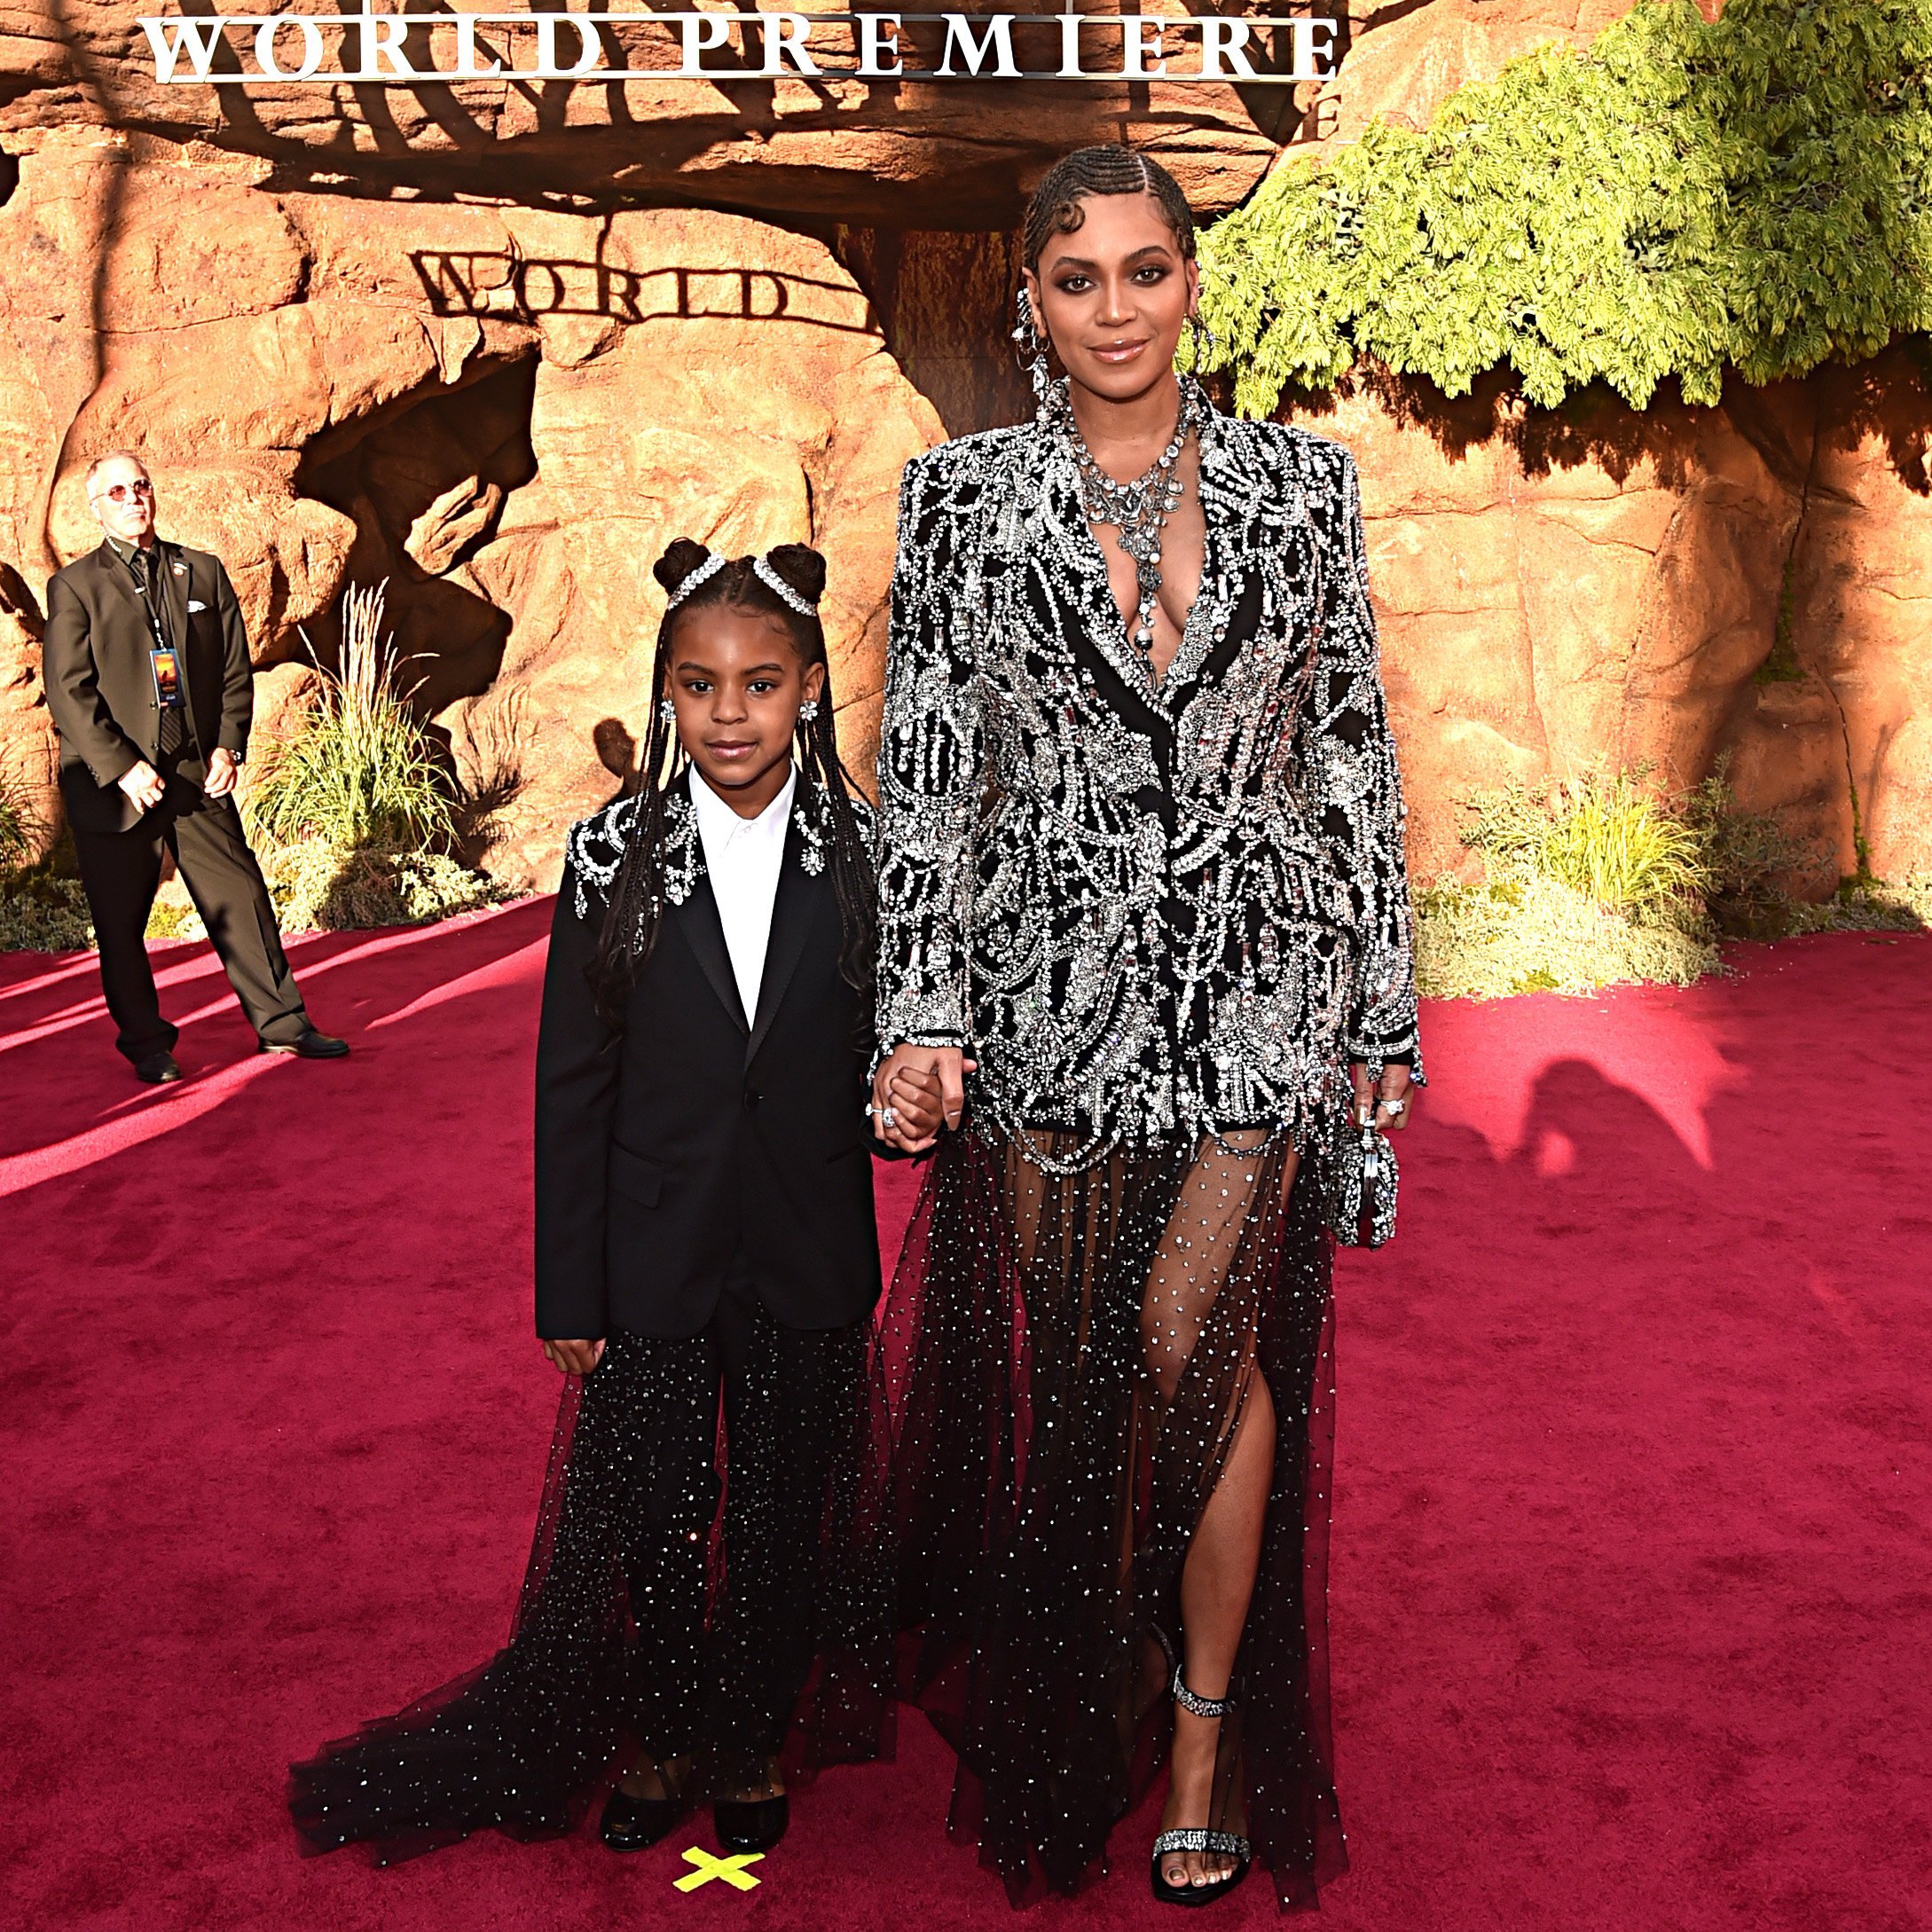 Beyonce is escorted by her daughter, Blue Ivy Carter at the world premiere of "The Lion King" at the Dolby Theater in Hollywood on July 9, 2019. | Source: Getty Images